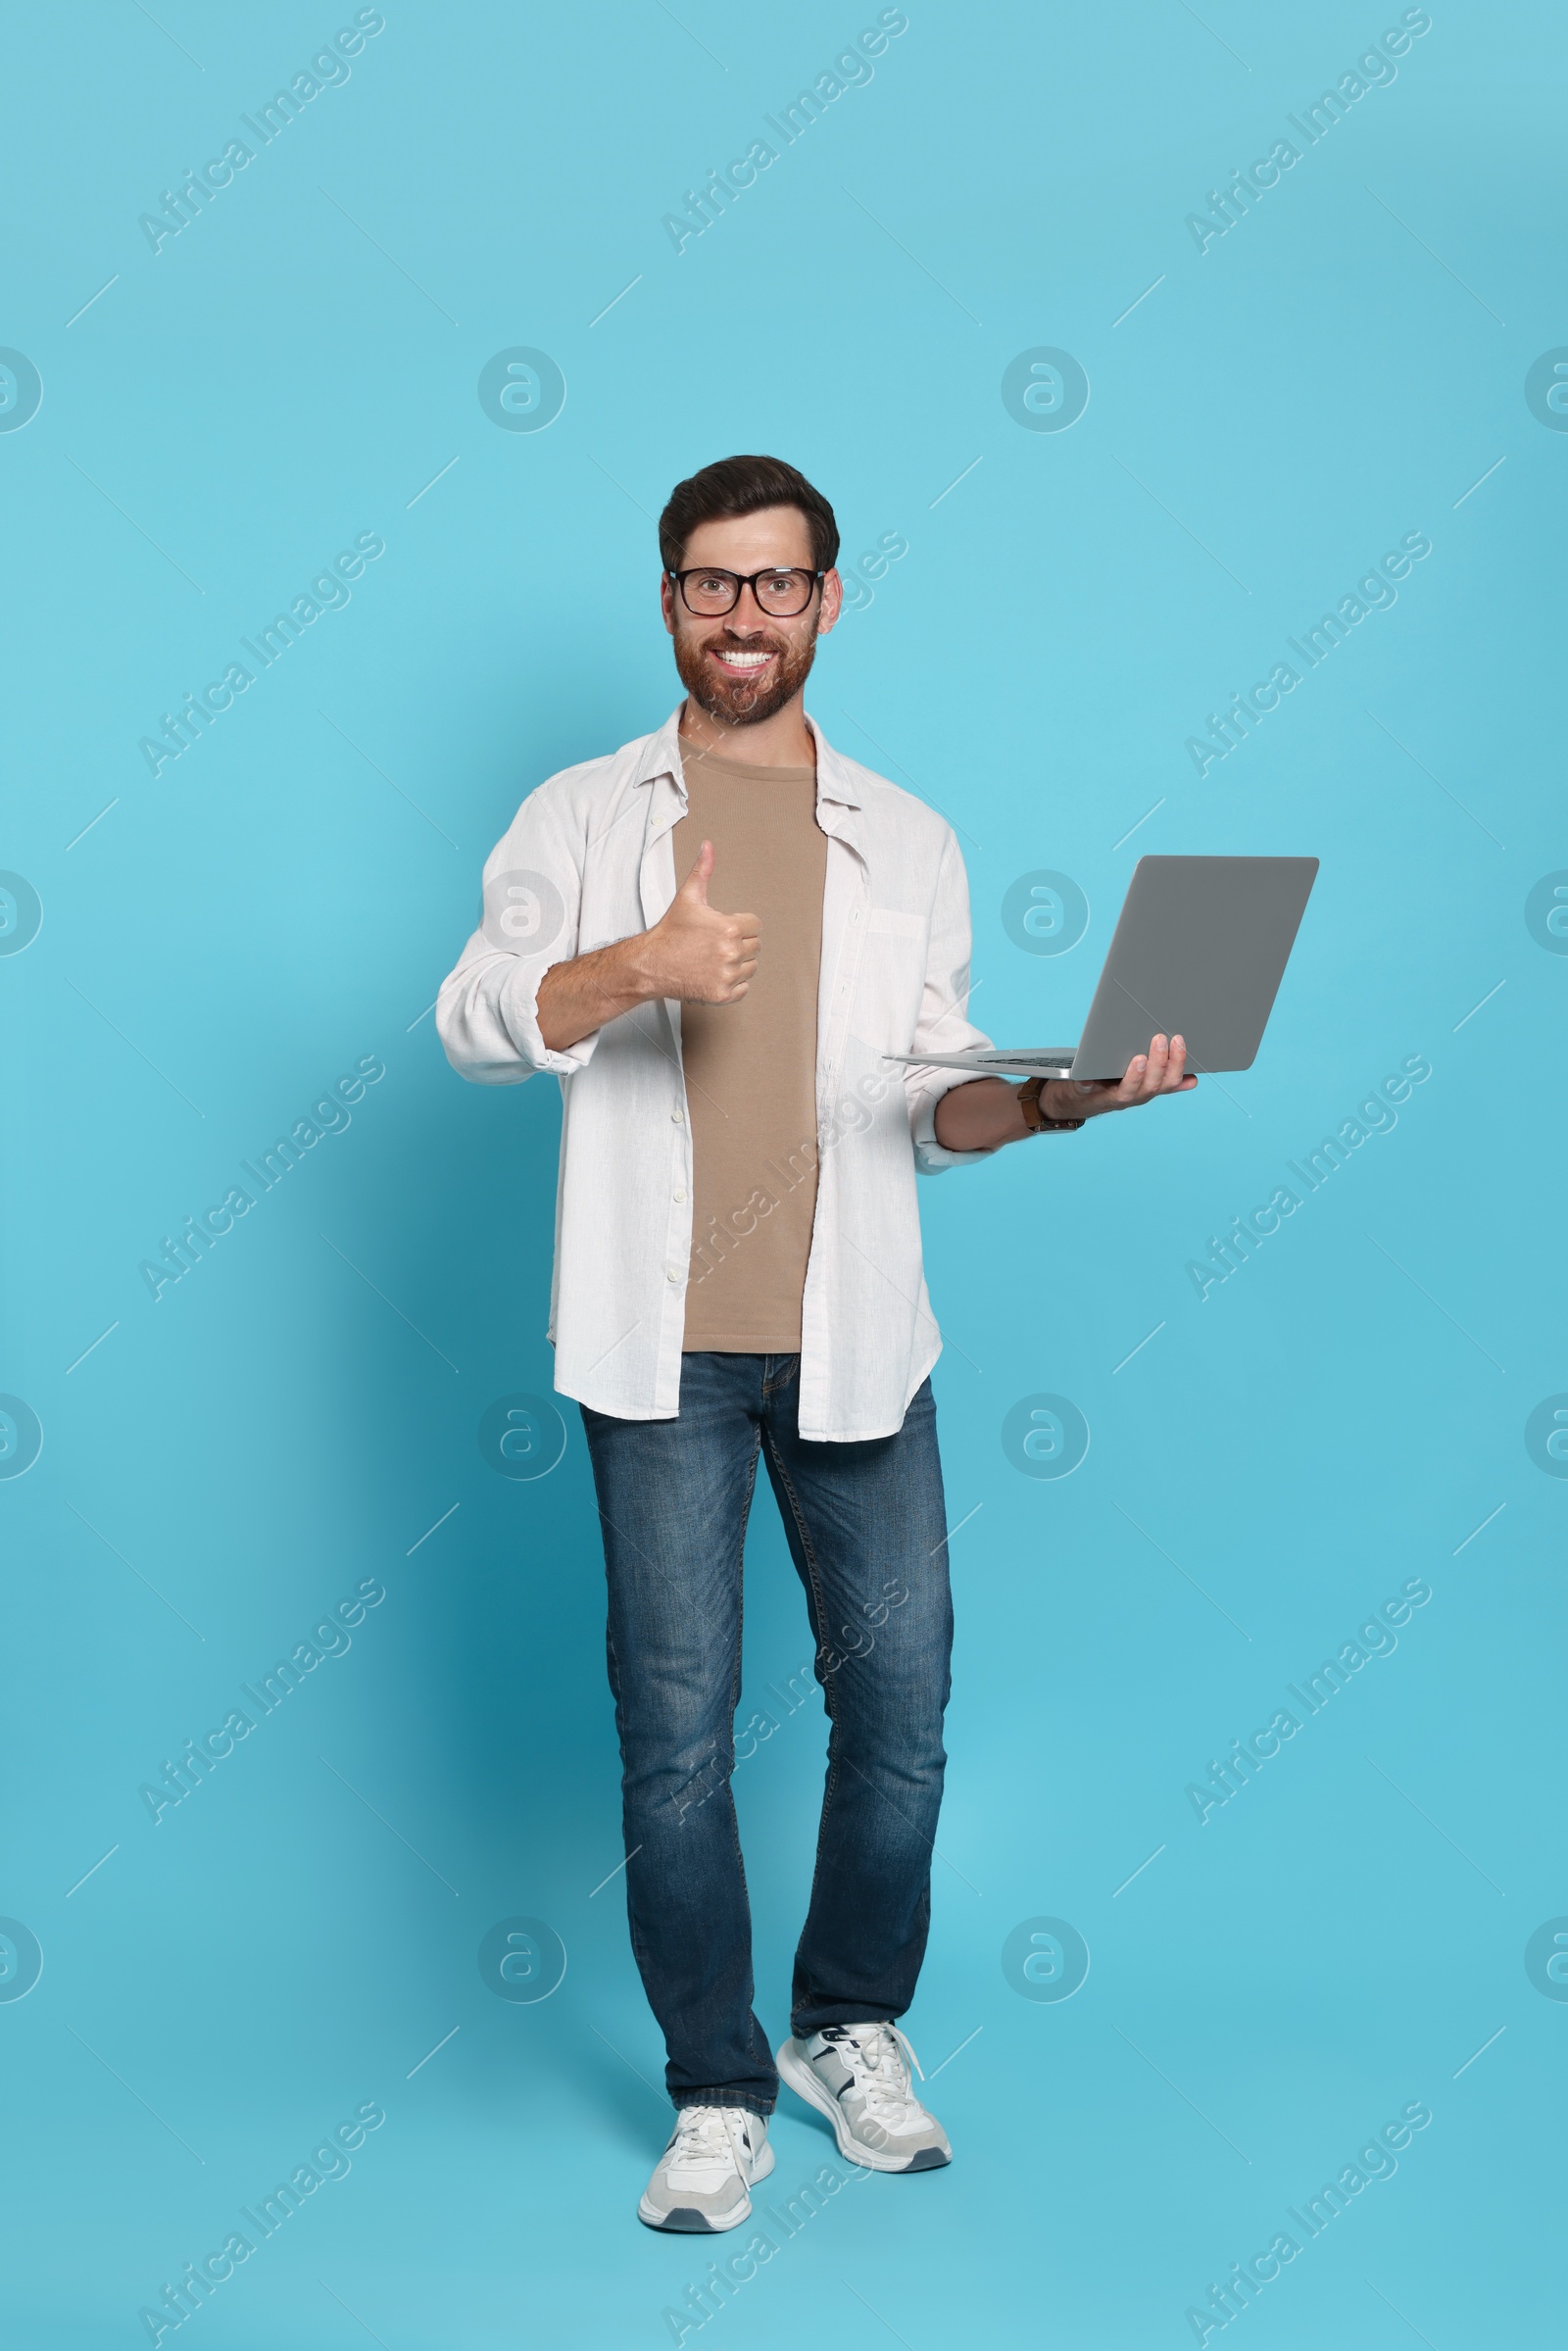 Photo of Handsome man with laptop showing thumb up gesture on light blue background